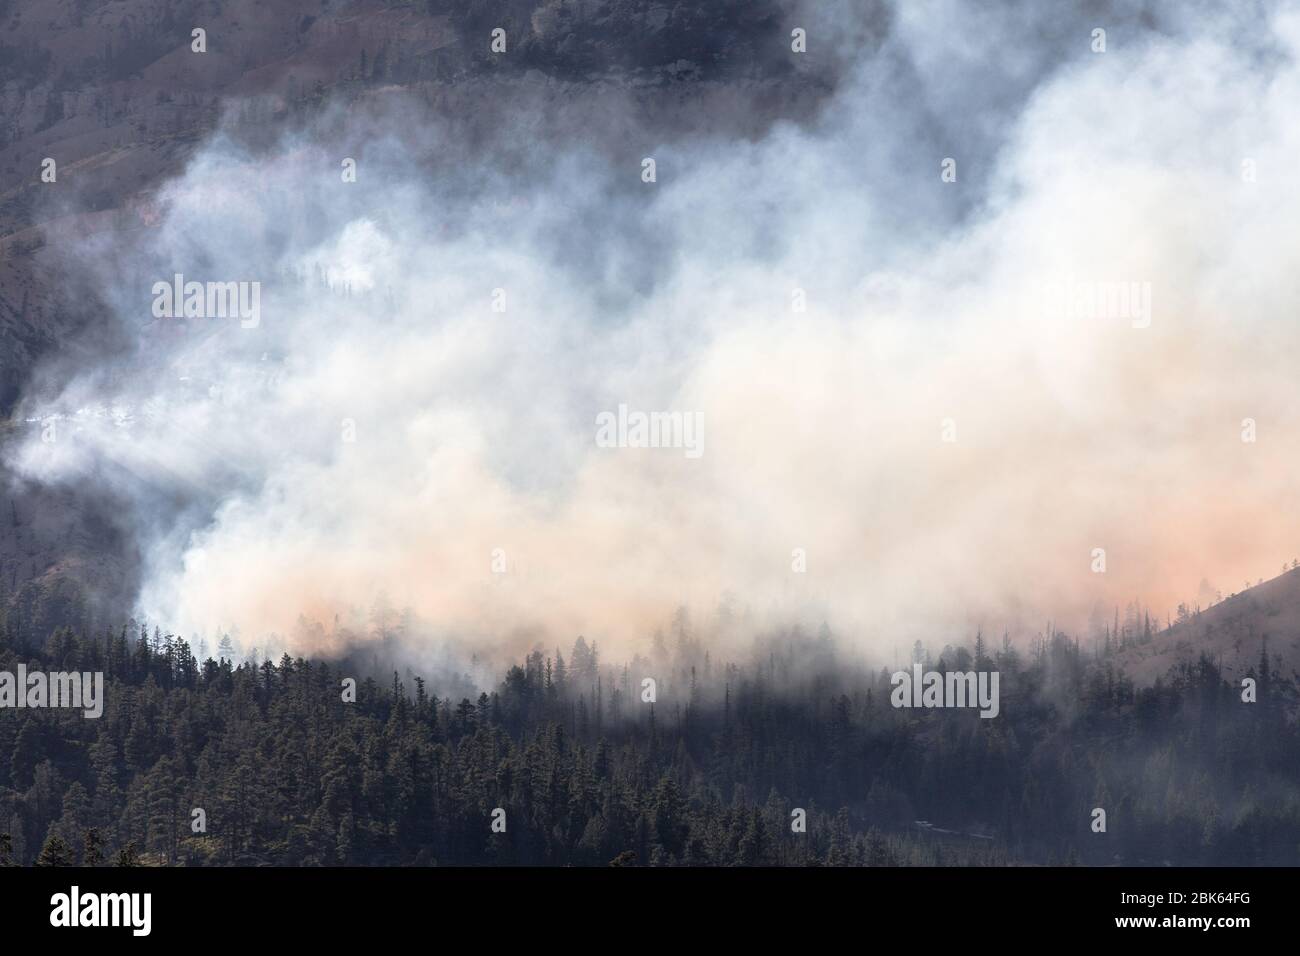 Forest Fire on September 1, 2019 near Bryce Canyon, Utah, United States. Stock Photo